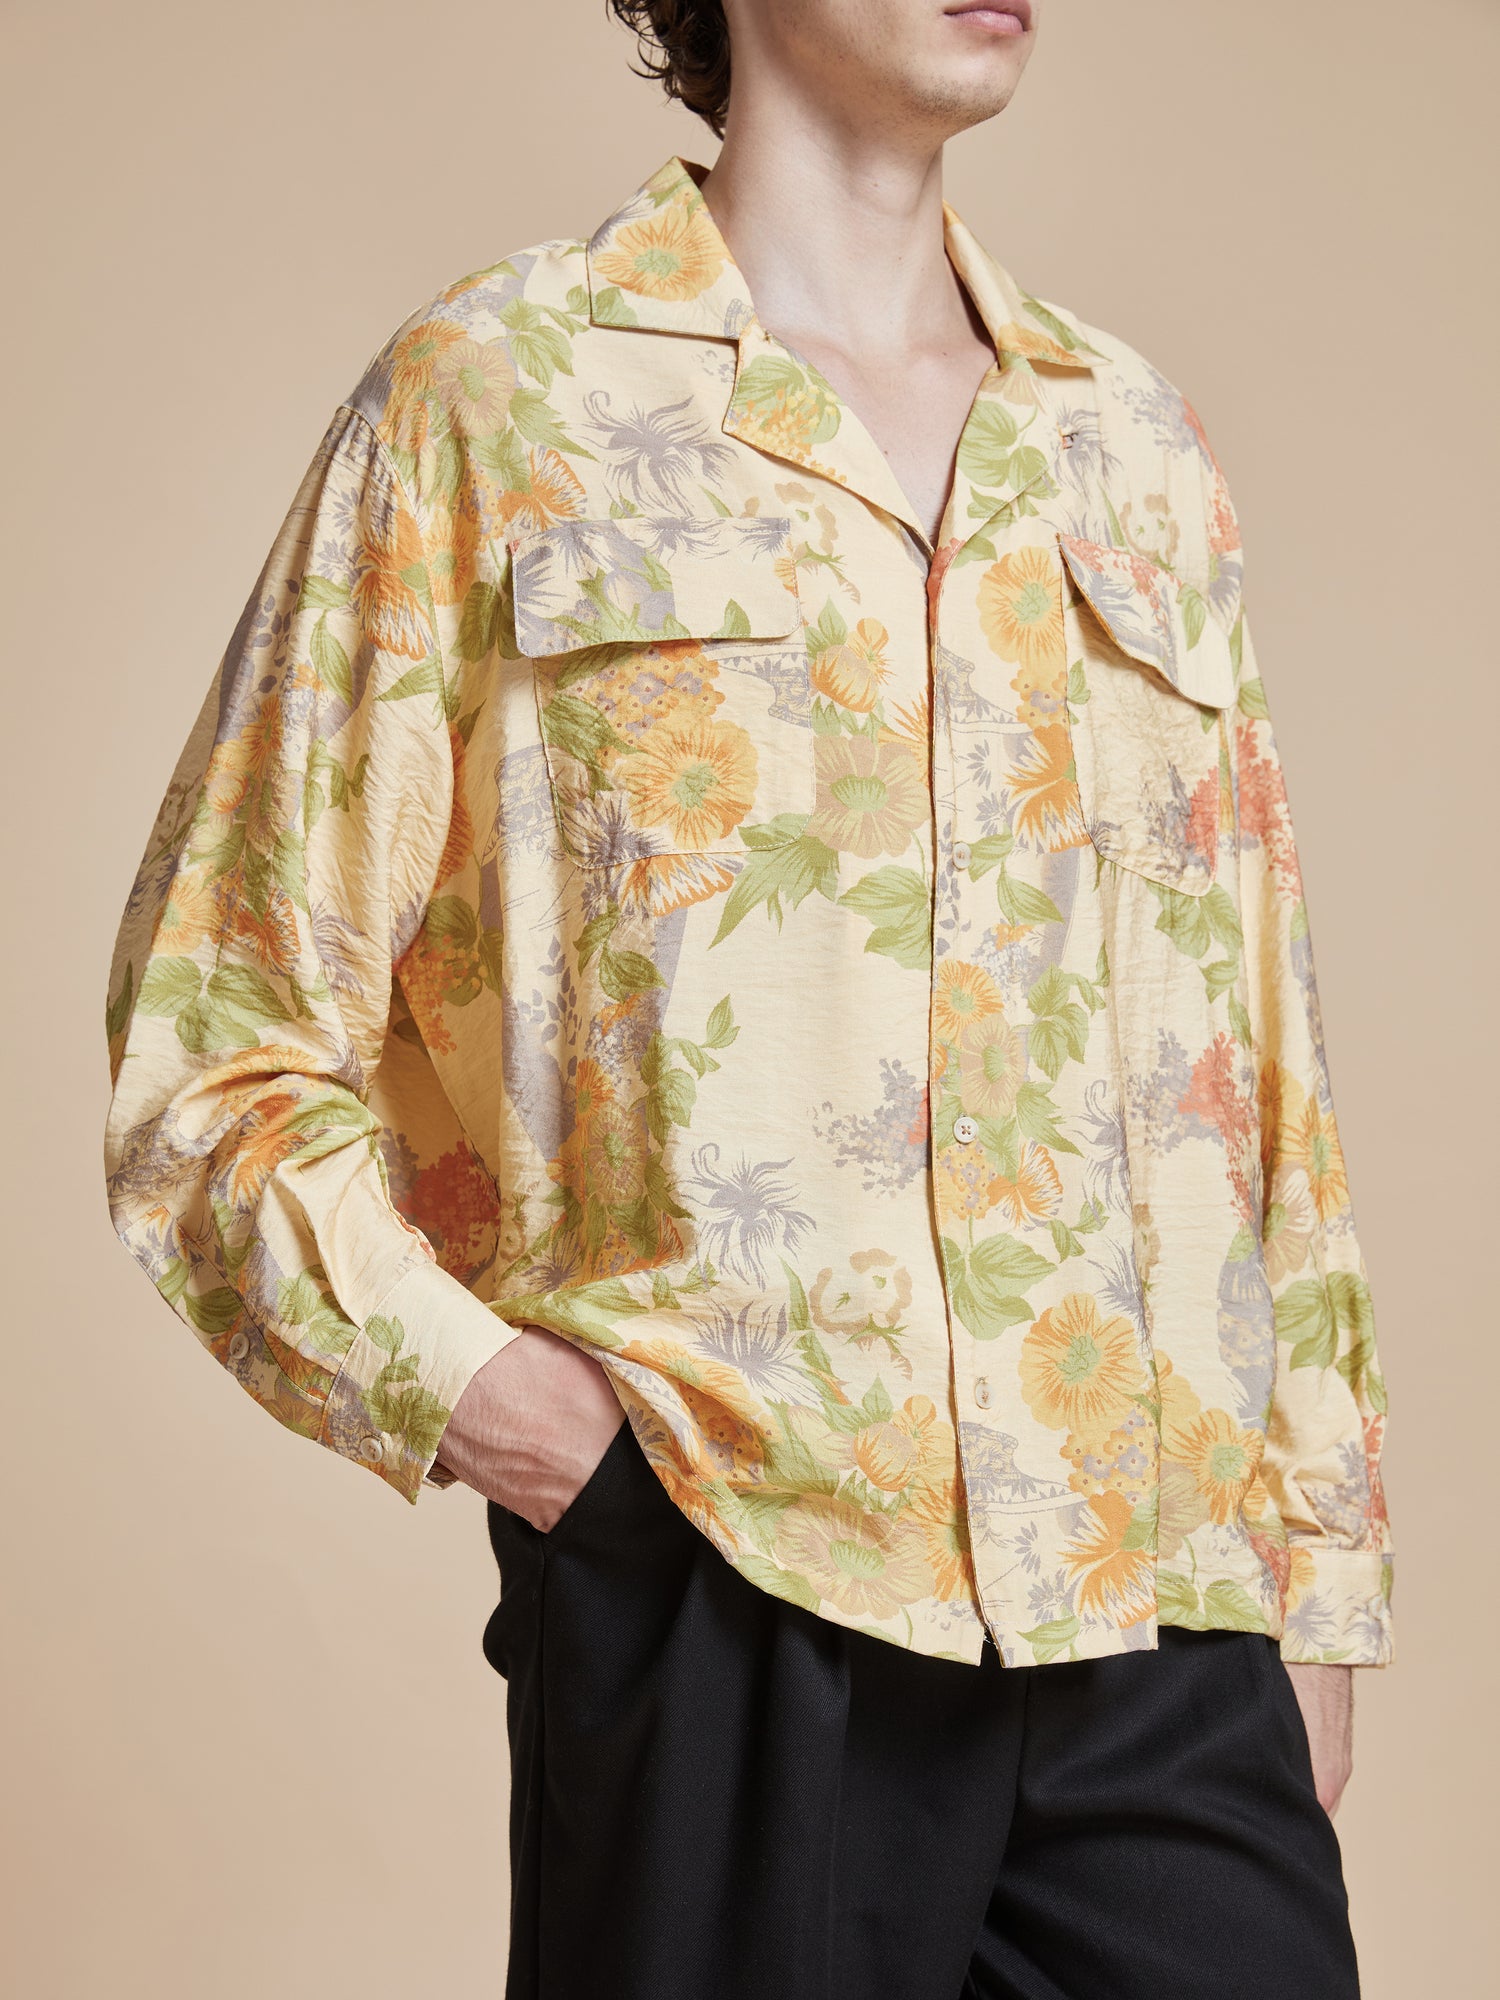 The Meraj Vase Pot Long Sleeve Camp Shirt by Found is adorned with vibrant yellow floral phulkari motifs inspired by nature.